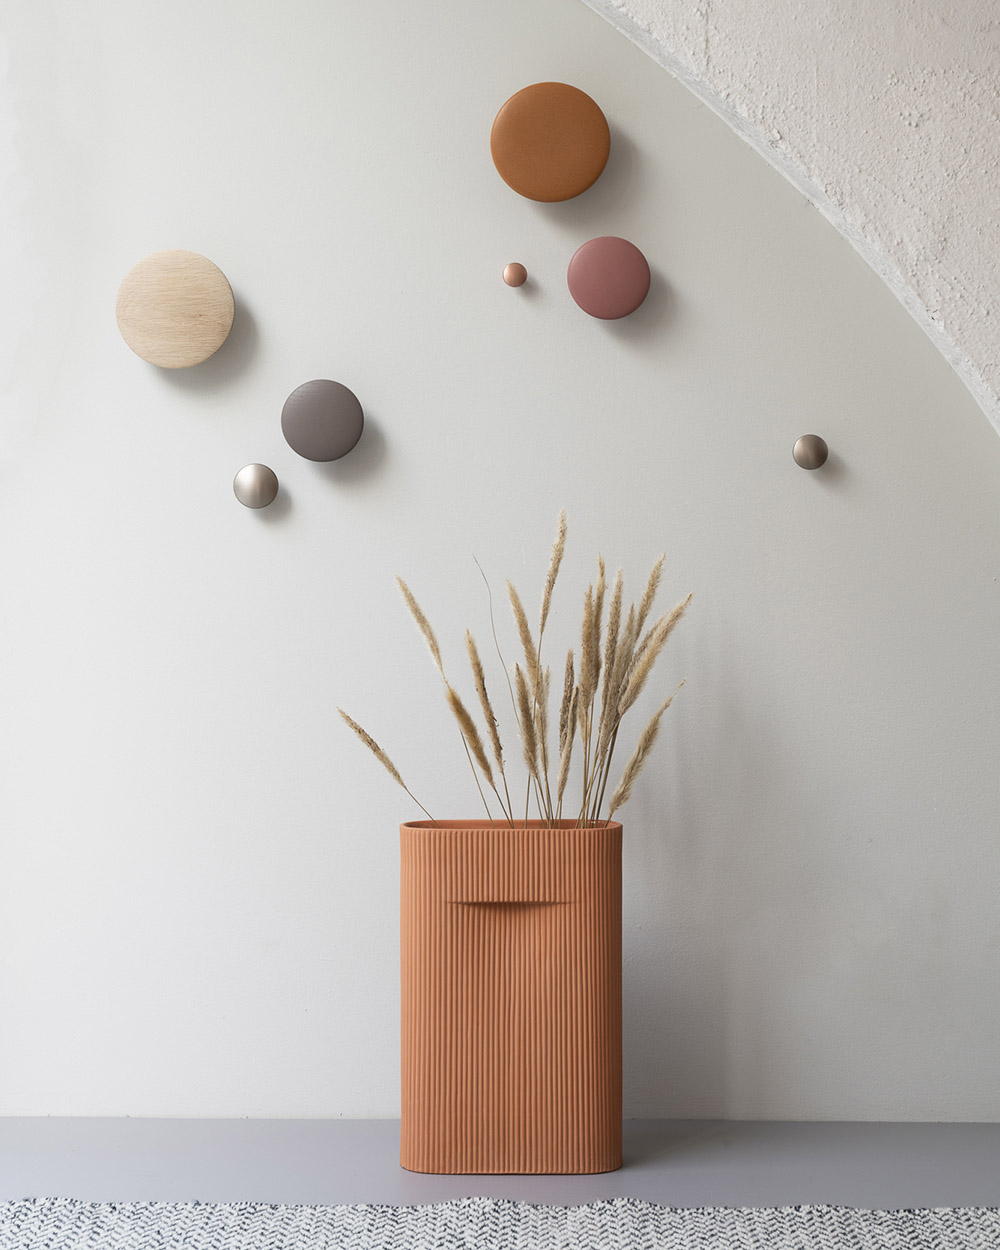 Muuto on Twitter: "With its refined dent, the Ridge Vase makes flowers  stand upright while also working as a subtle handle when moving the vase  from one space to another: https://t.co/2e8qnZIm3g #muuto #